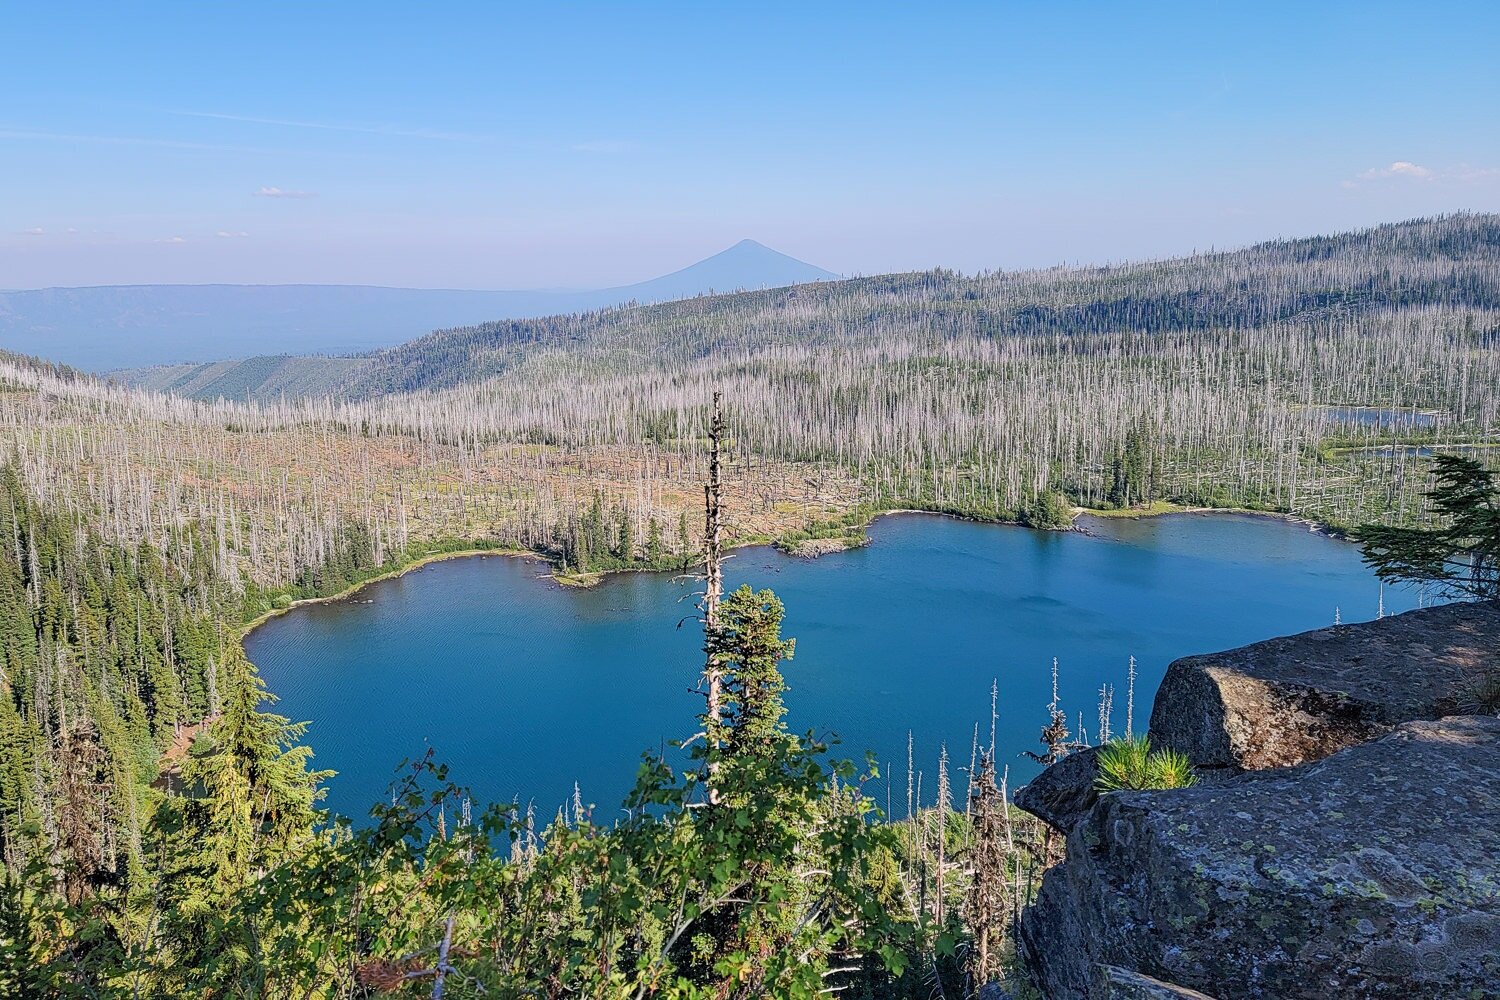 There’s no shortage of views on the Three Fingered Jack Loop - this view is of Wasco Lake from Minto Pass